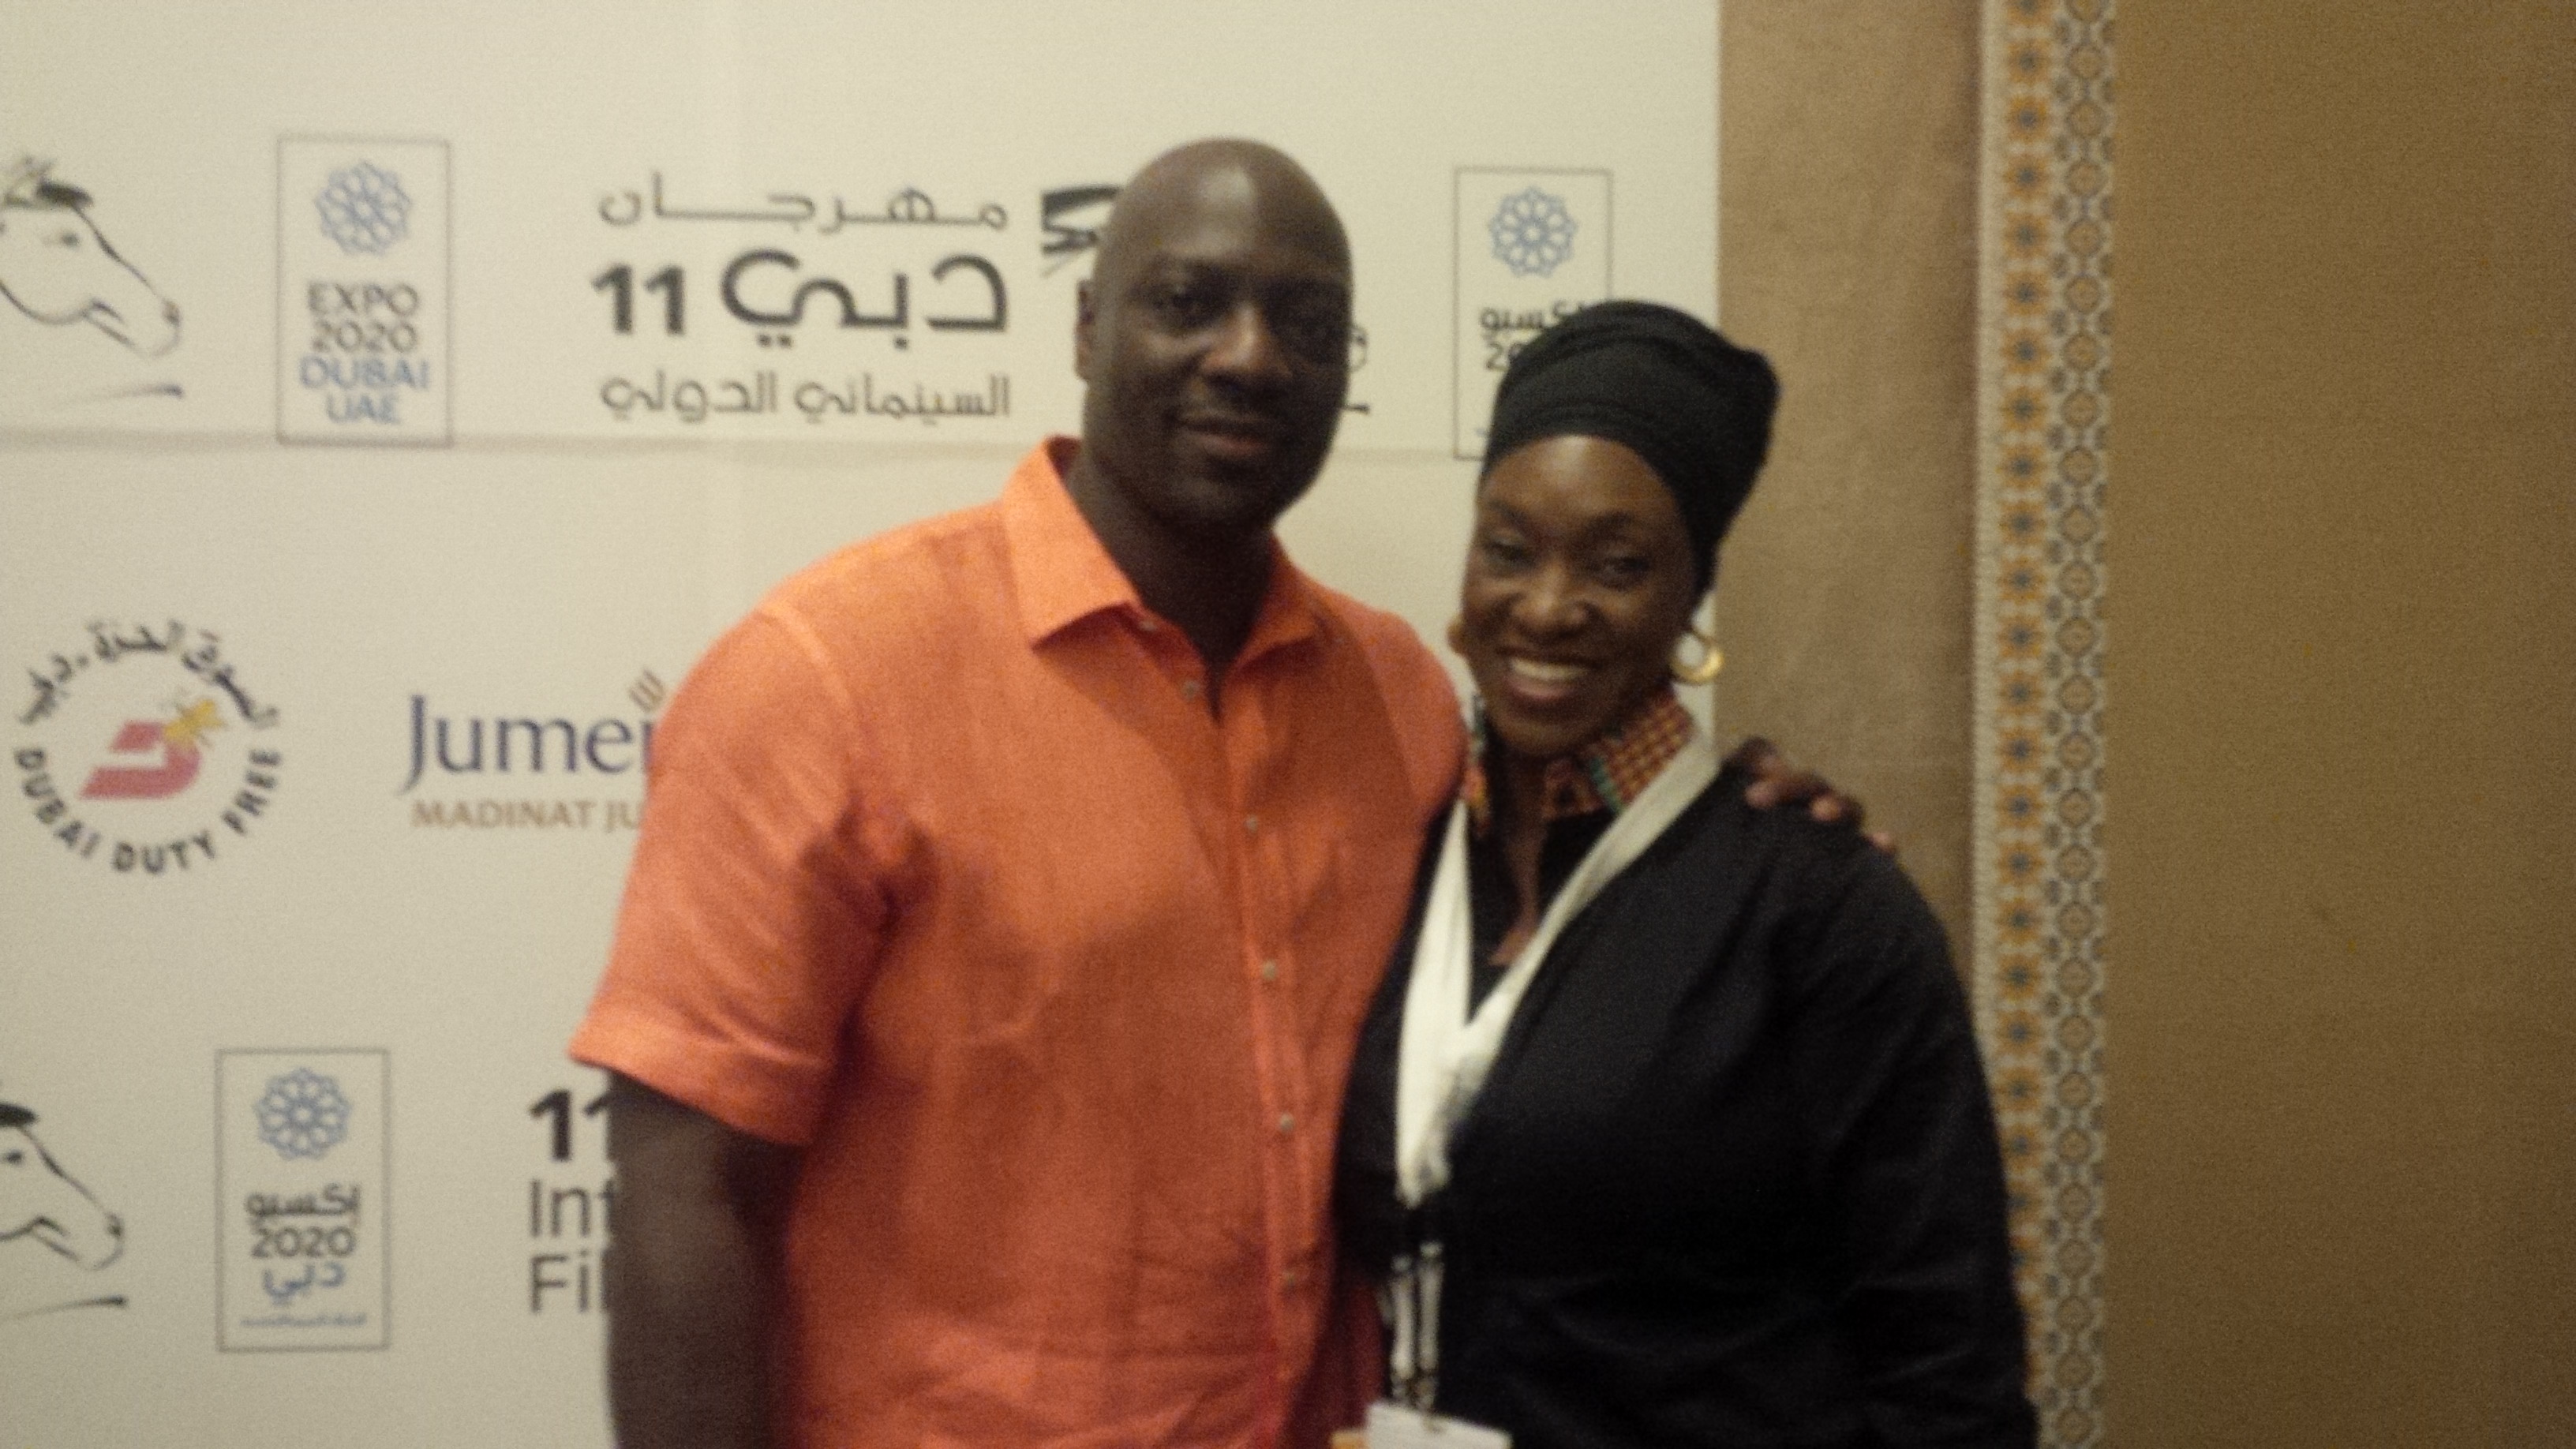 With Hollywood actor Adewale Agbaje @ the 11th Dubai International Film Festival in 2014.